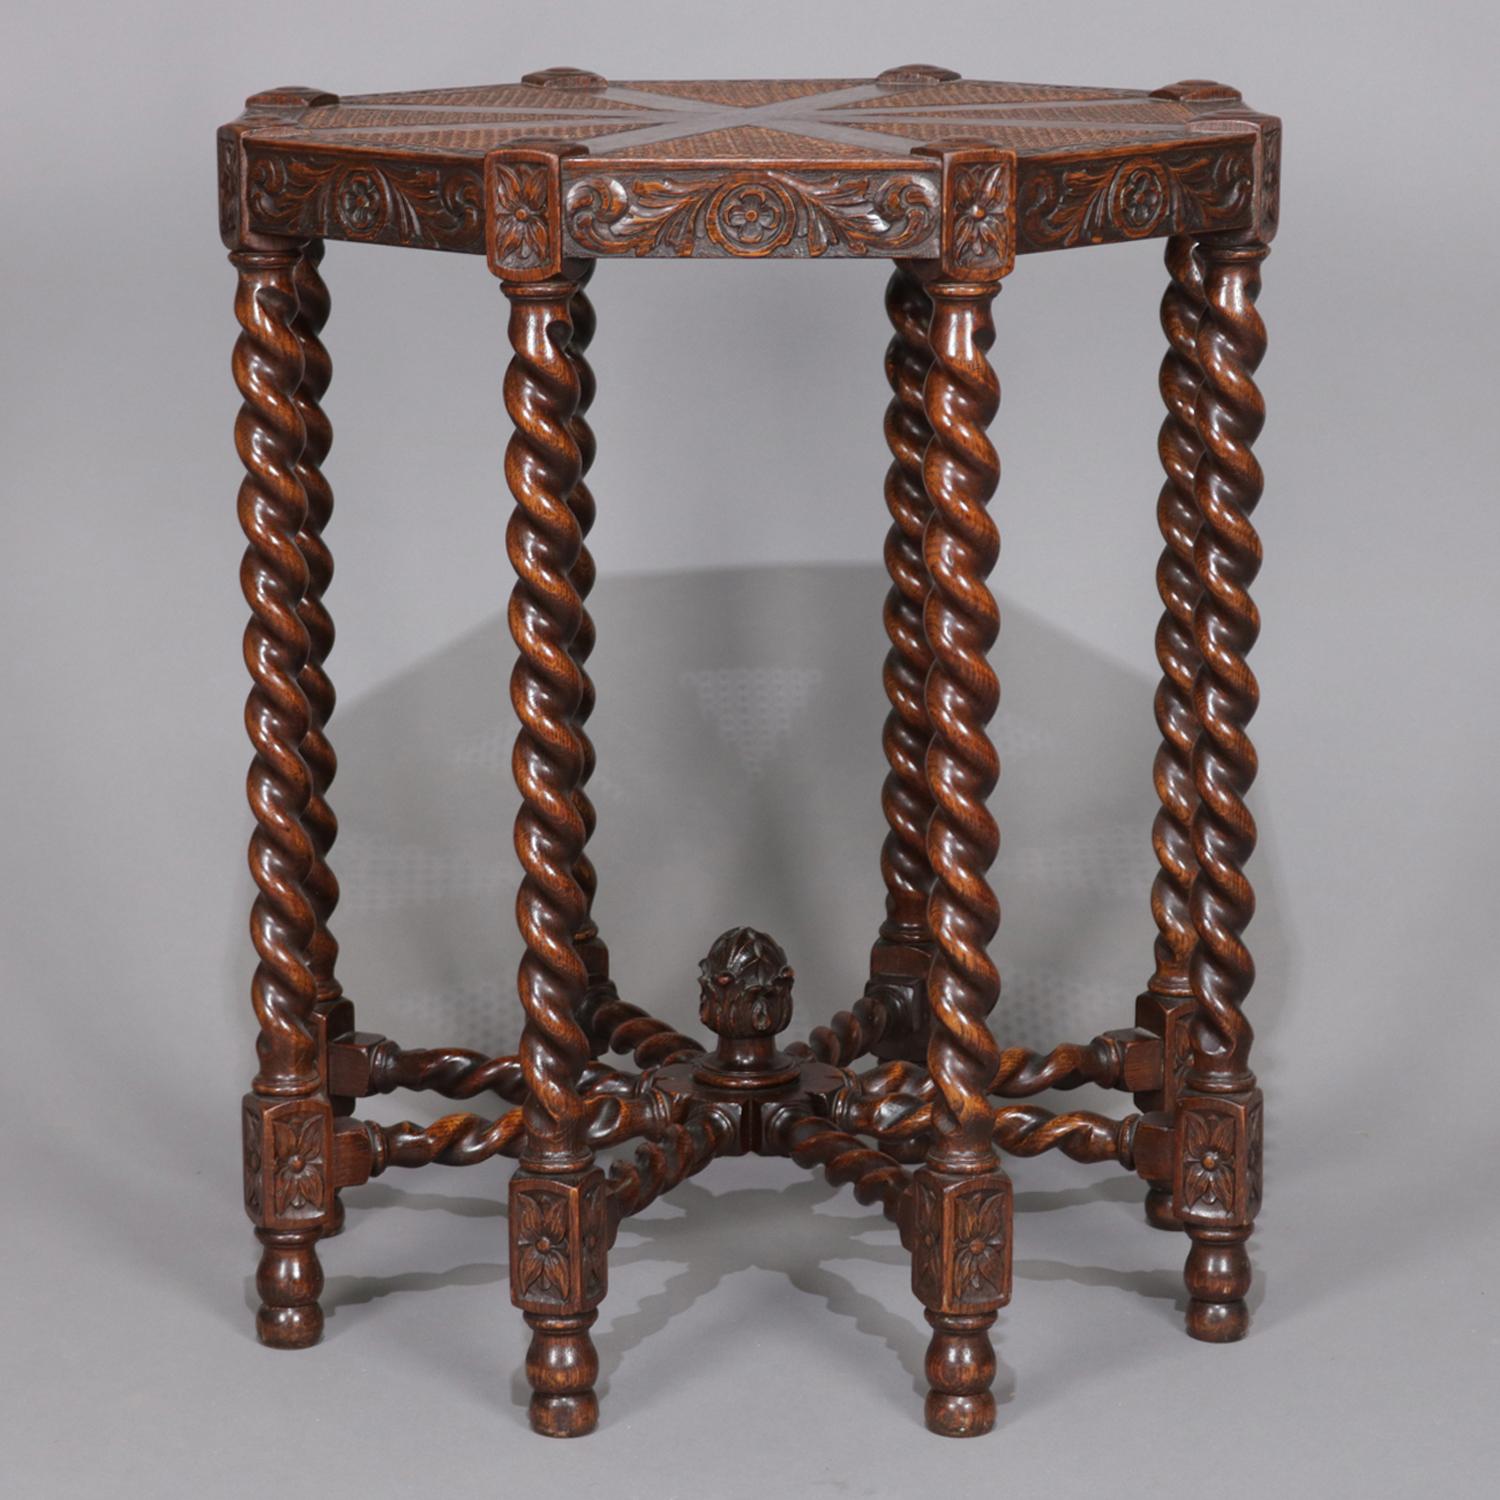 Antique English Elizabethan plant stand features oak frame with carved foliate and scroll decoration on octagonal sectioned and caned top raised on barley twist legs with oak and cane lamp table, circa 1850.

Measures: 29